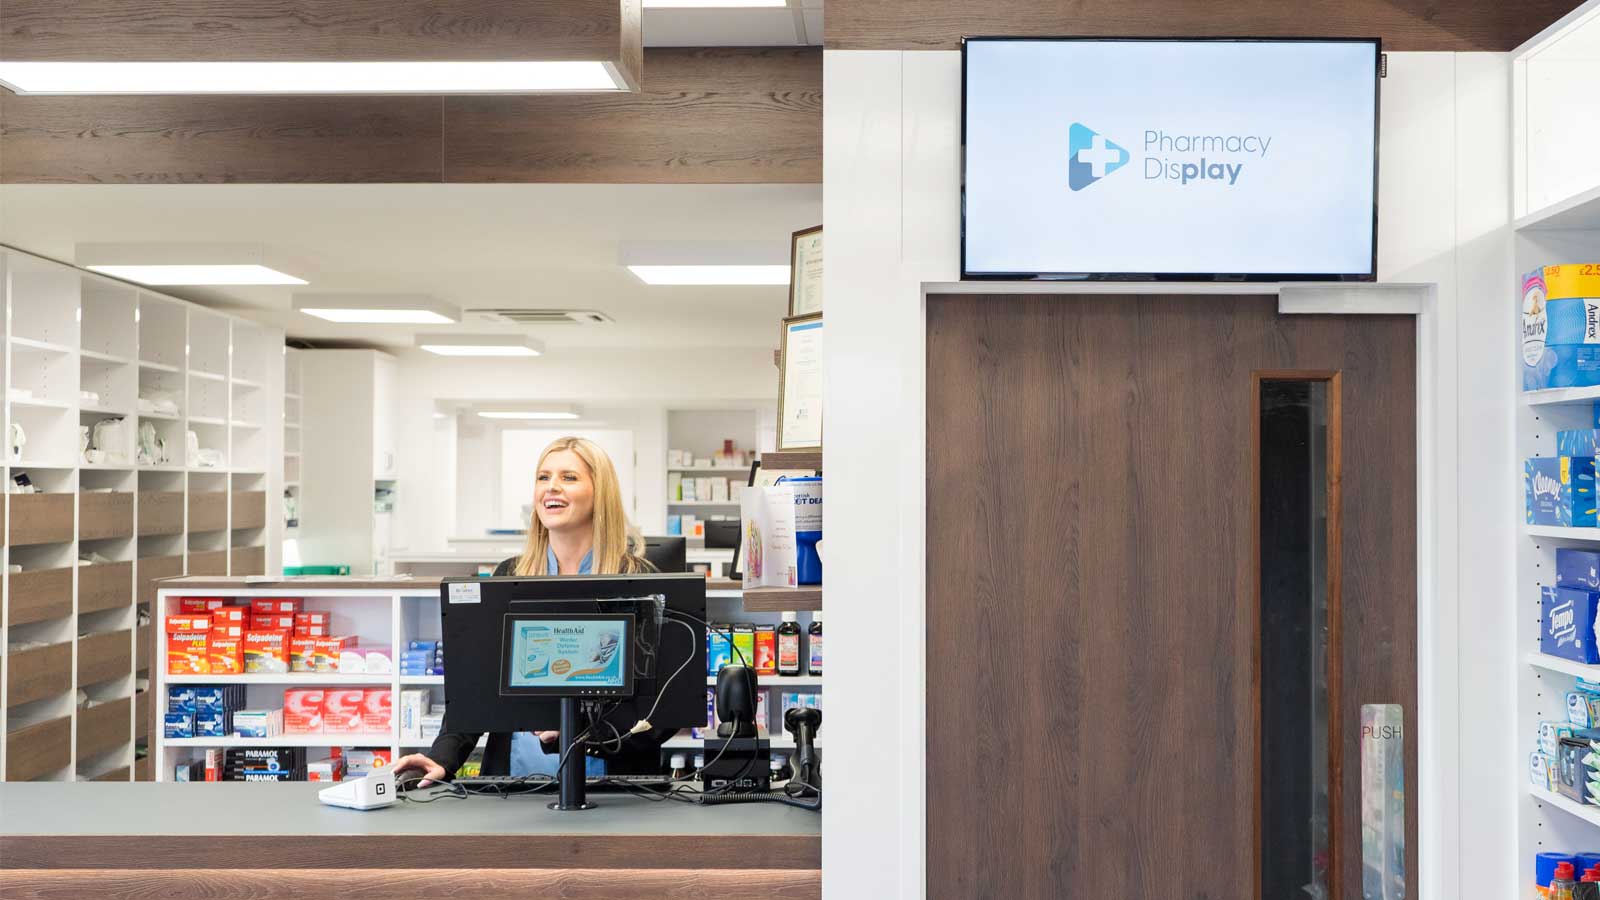 The top 5 reasons why you should consider digital signage in your pharmacy